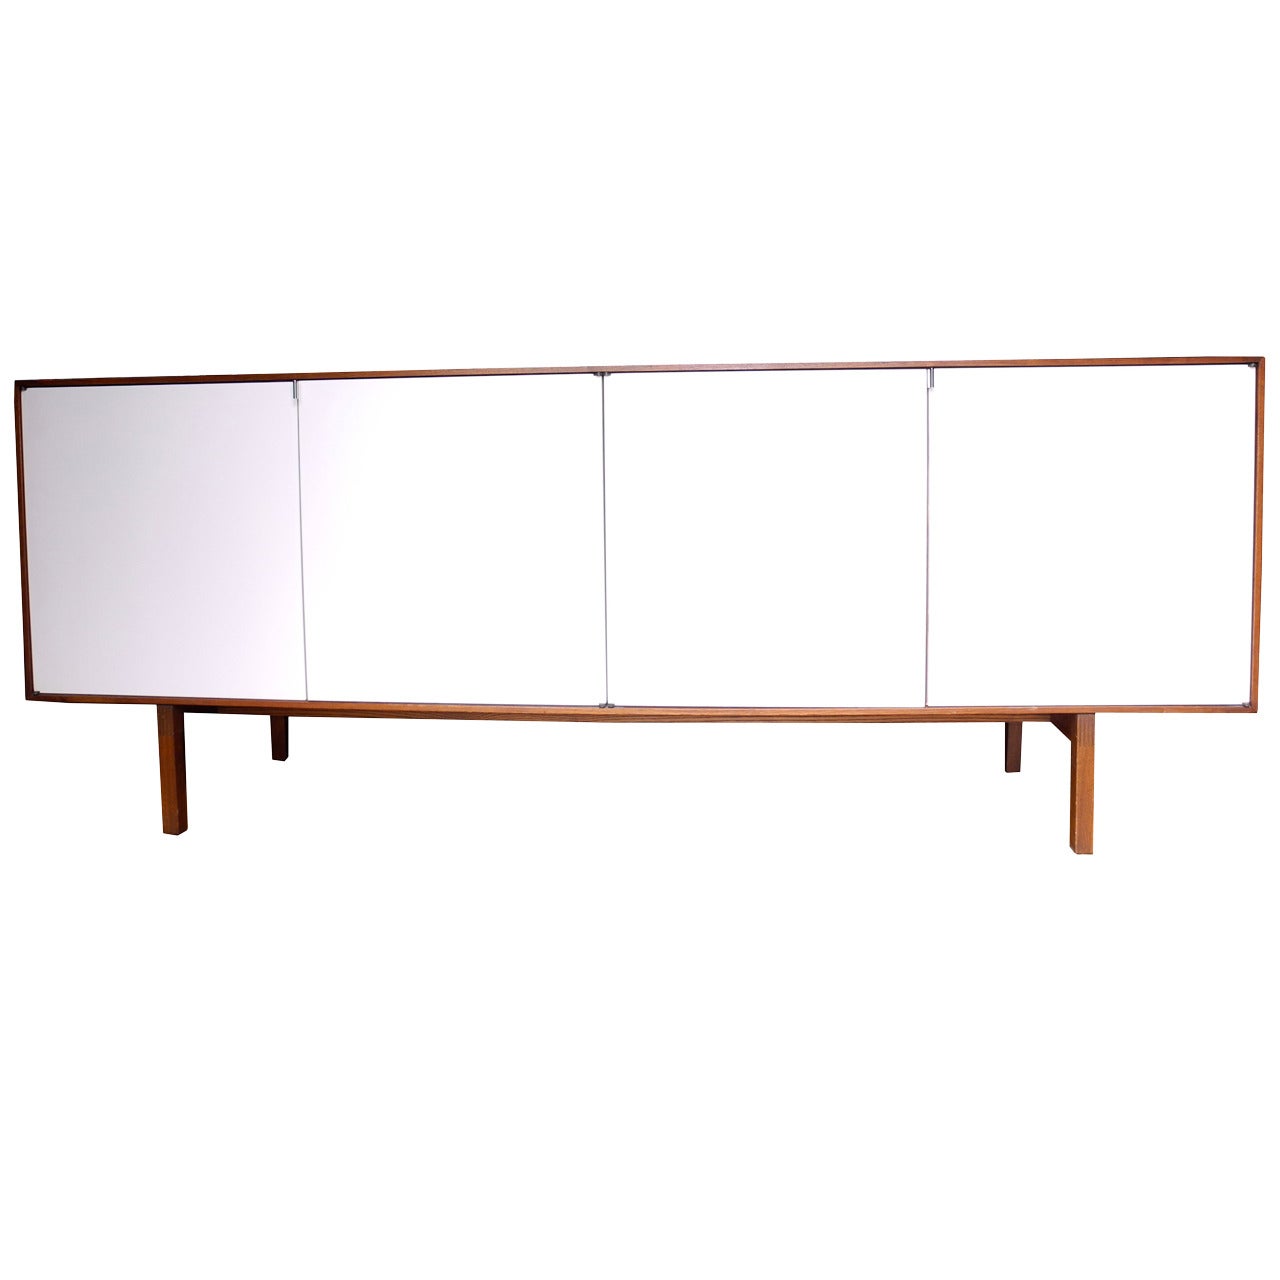 Modern Walnut Case Sideboard, Credenza or Storage Cabinet by Florence Knoll